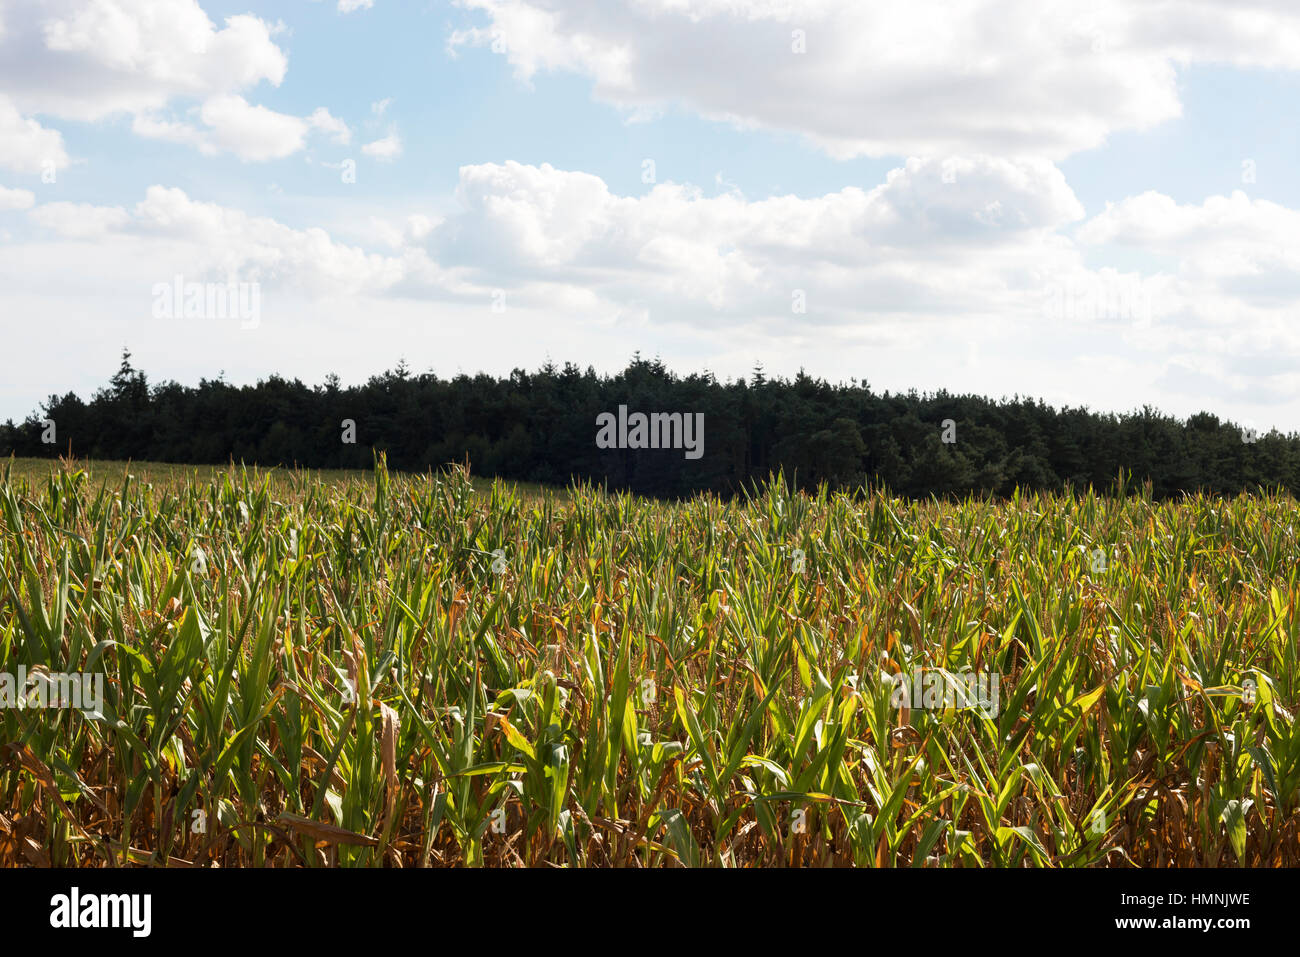 Crop of maize for biogas, Sutton, Suffolk, UK. Stock Photo